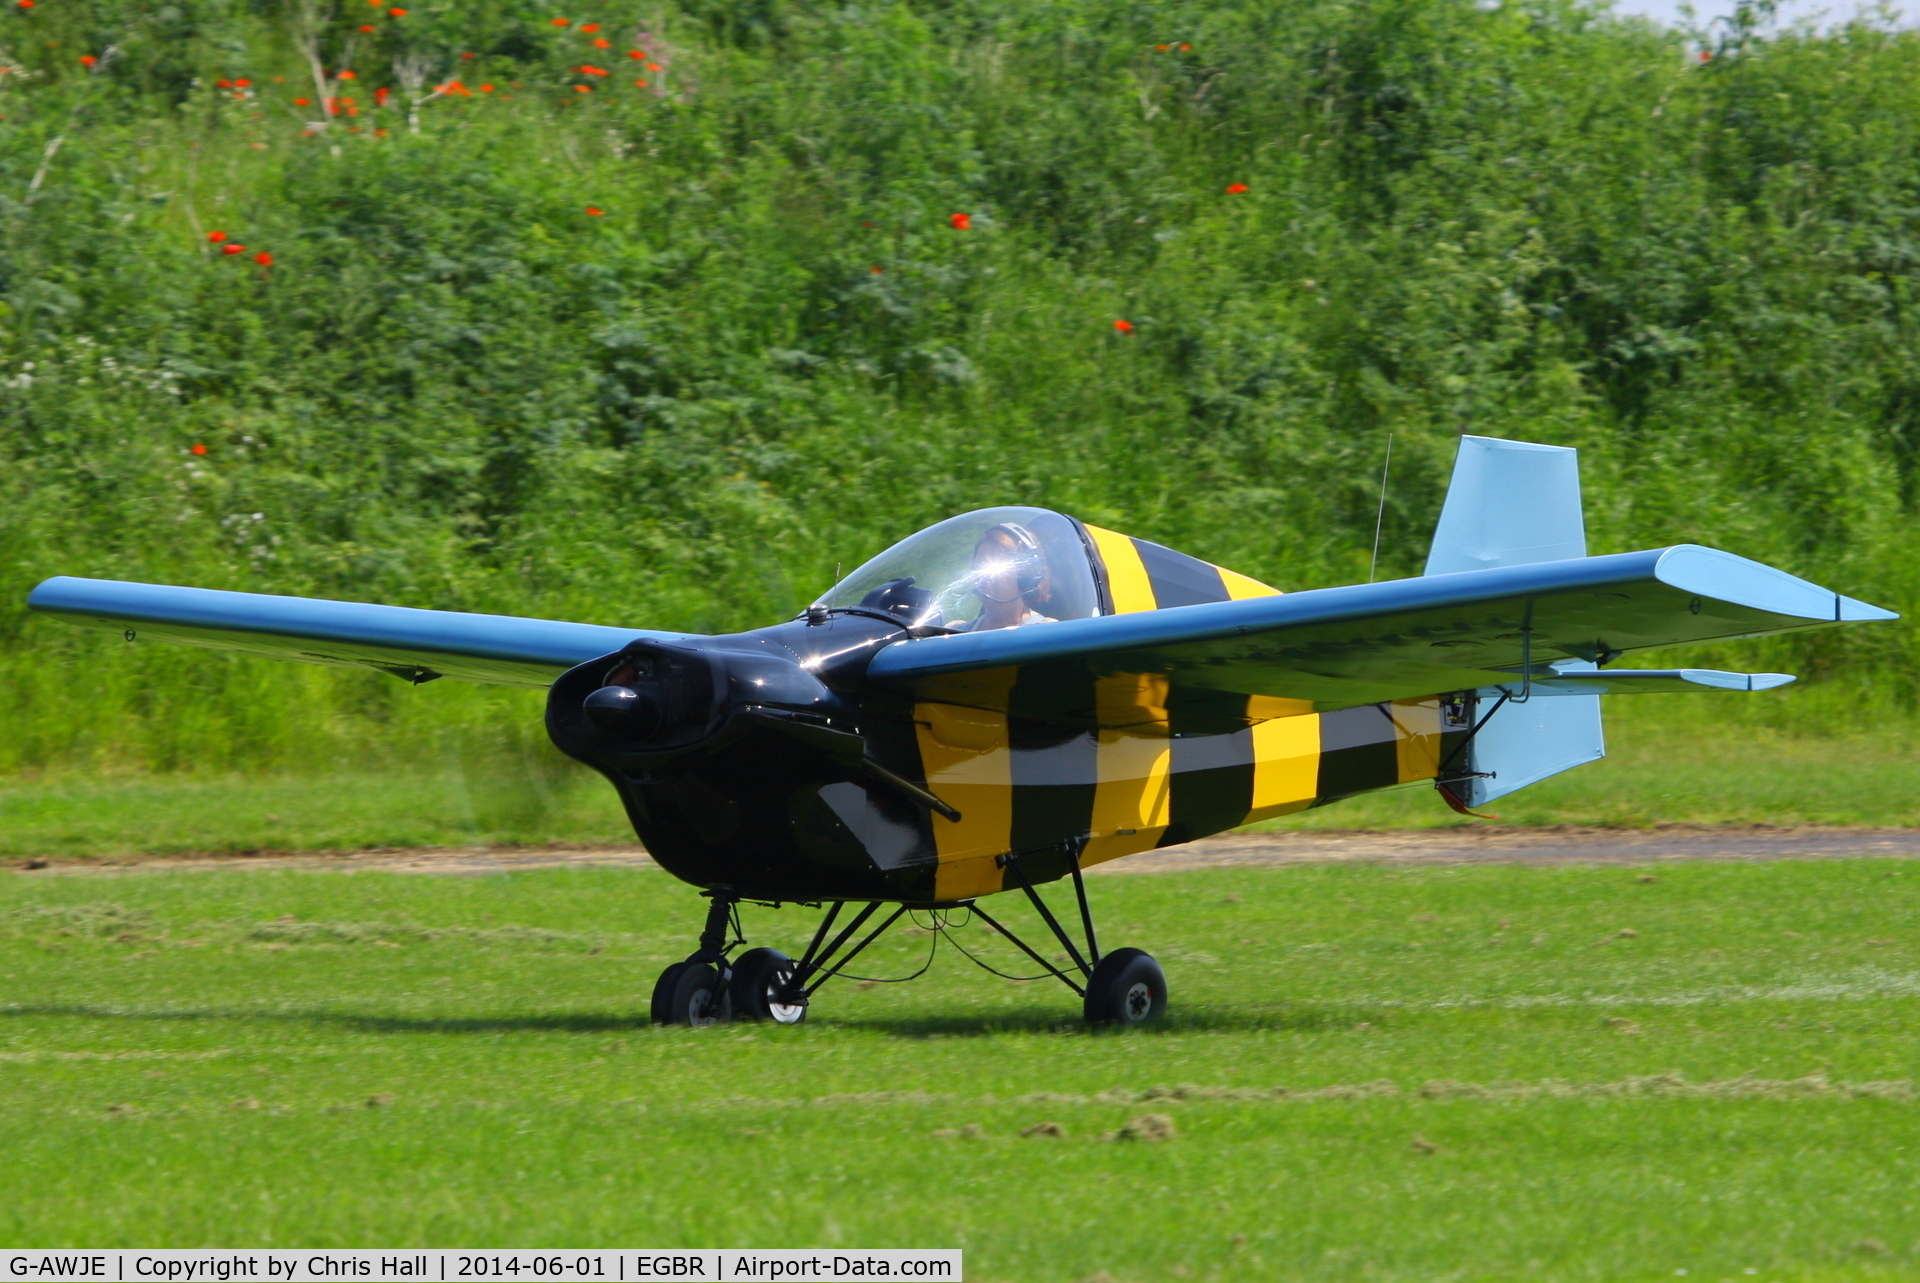 G-AWJE, 1968 Tipsy T-66 Nipper Mk 3 C/N S121, at Breighton's Open Cockpit & Biplane Fly-in, 2014